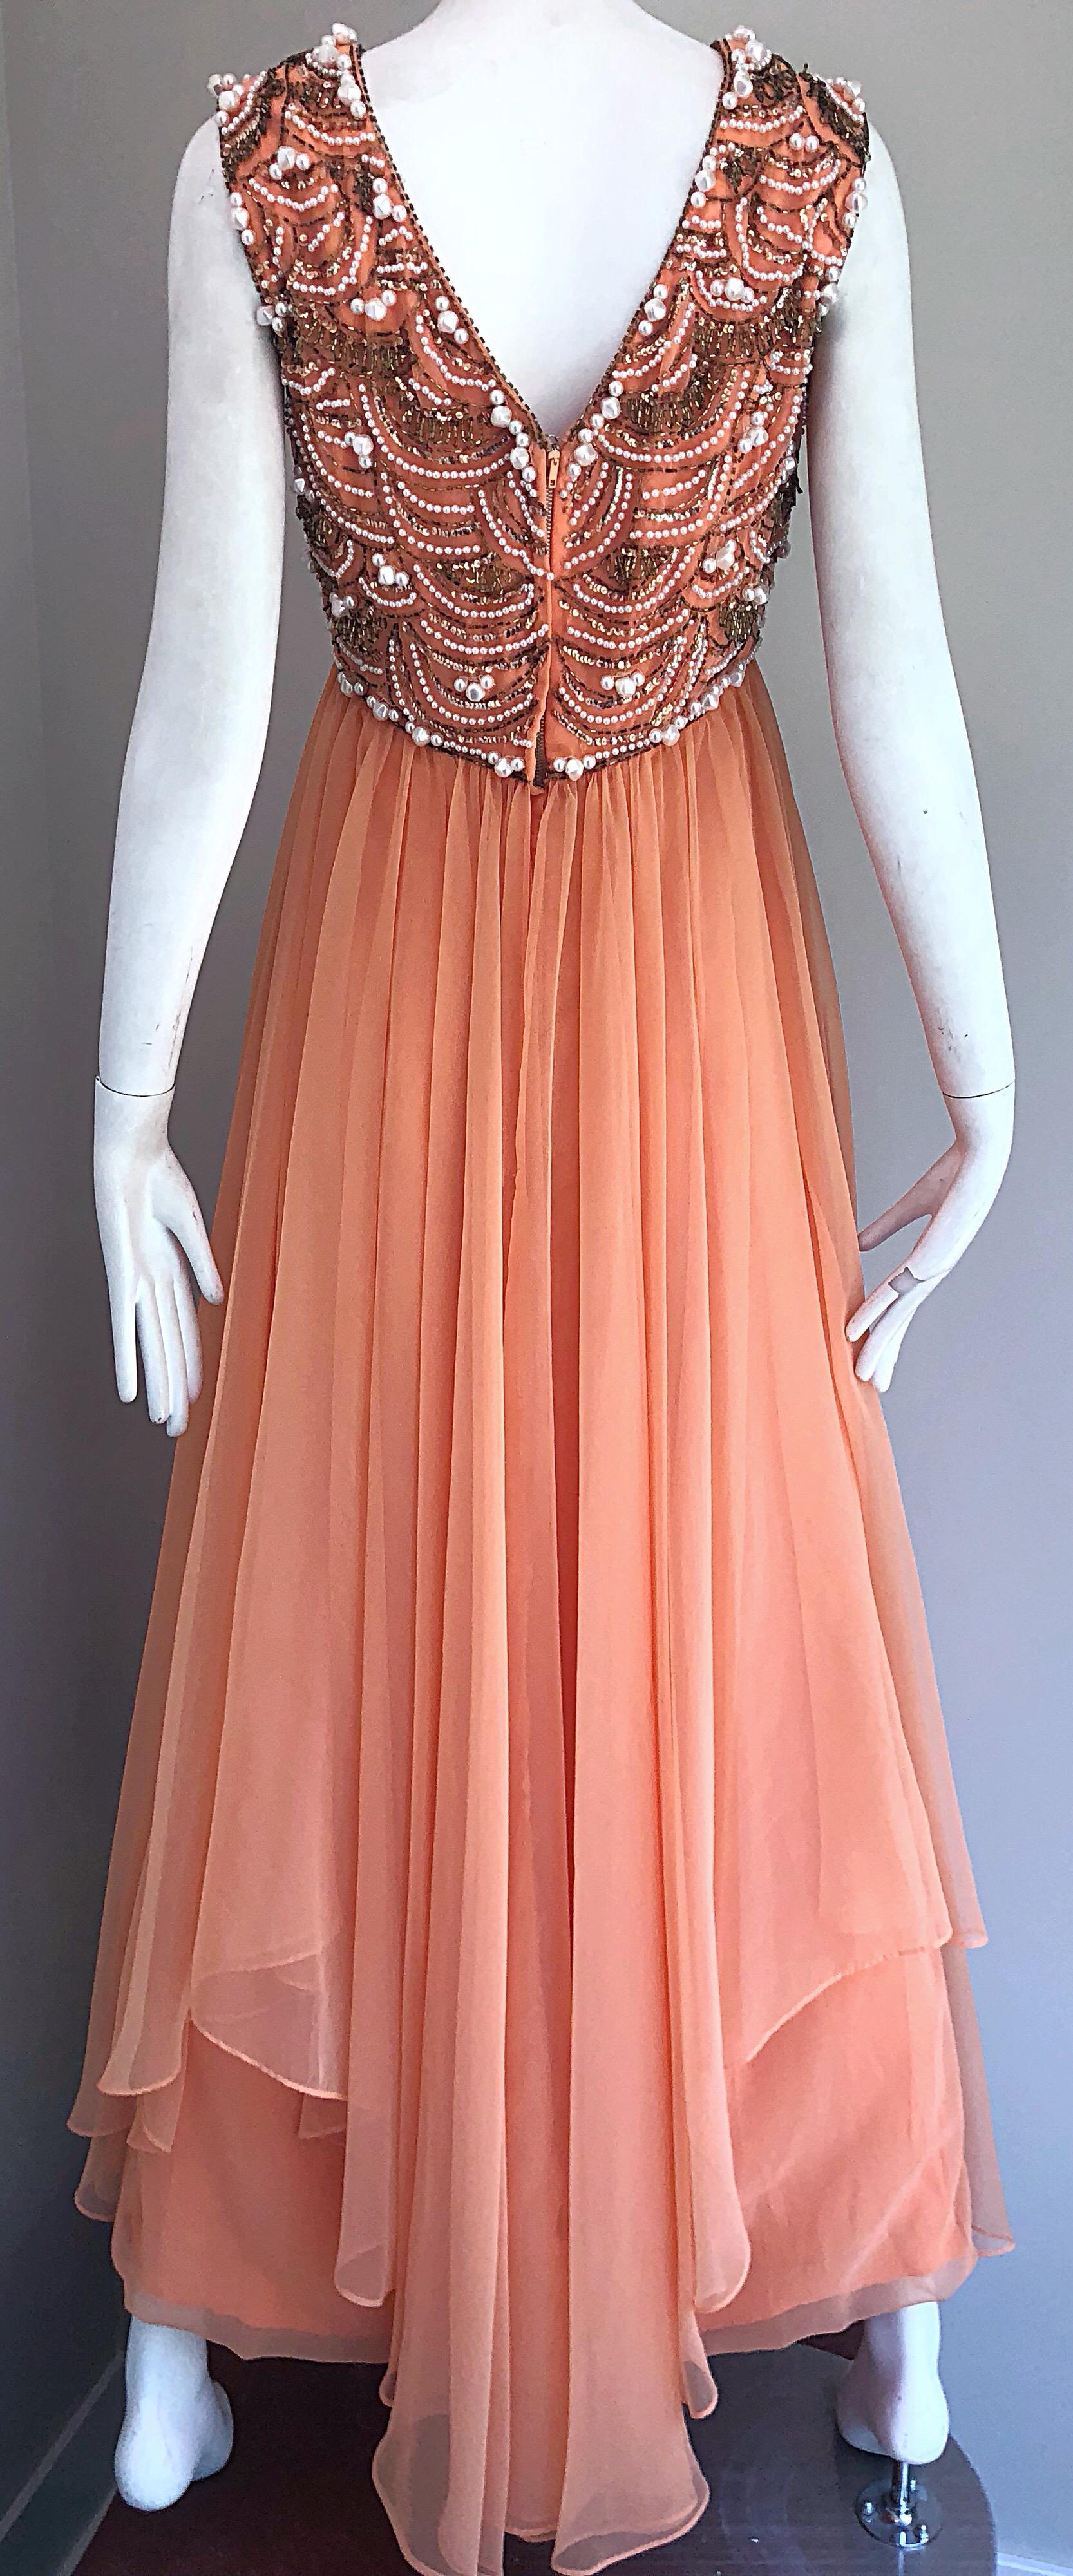 1960s Isabell Gerhart Sherbet Coral Demi Couture Beaded Chiffon 60s Gown Dress For Sale 2